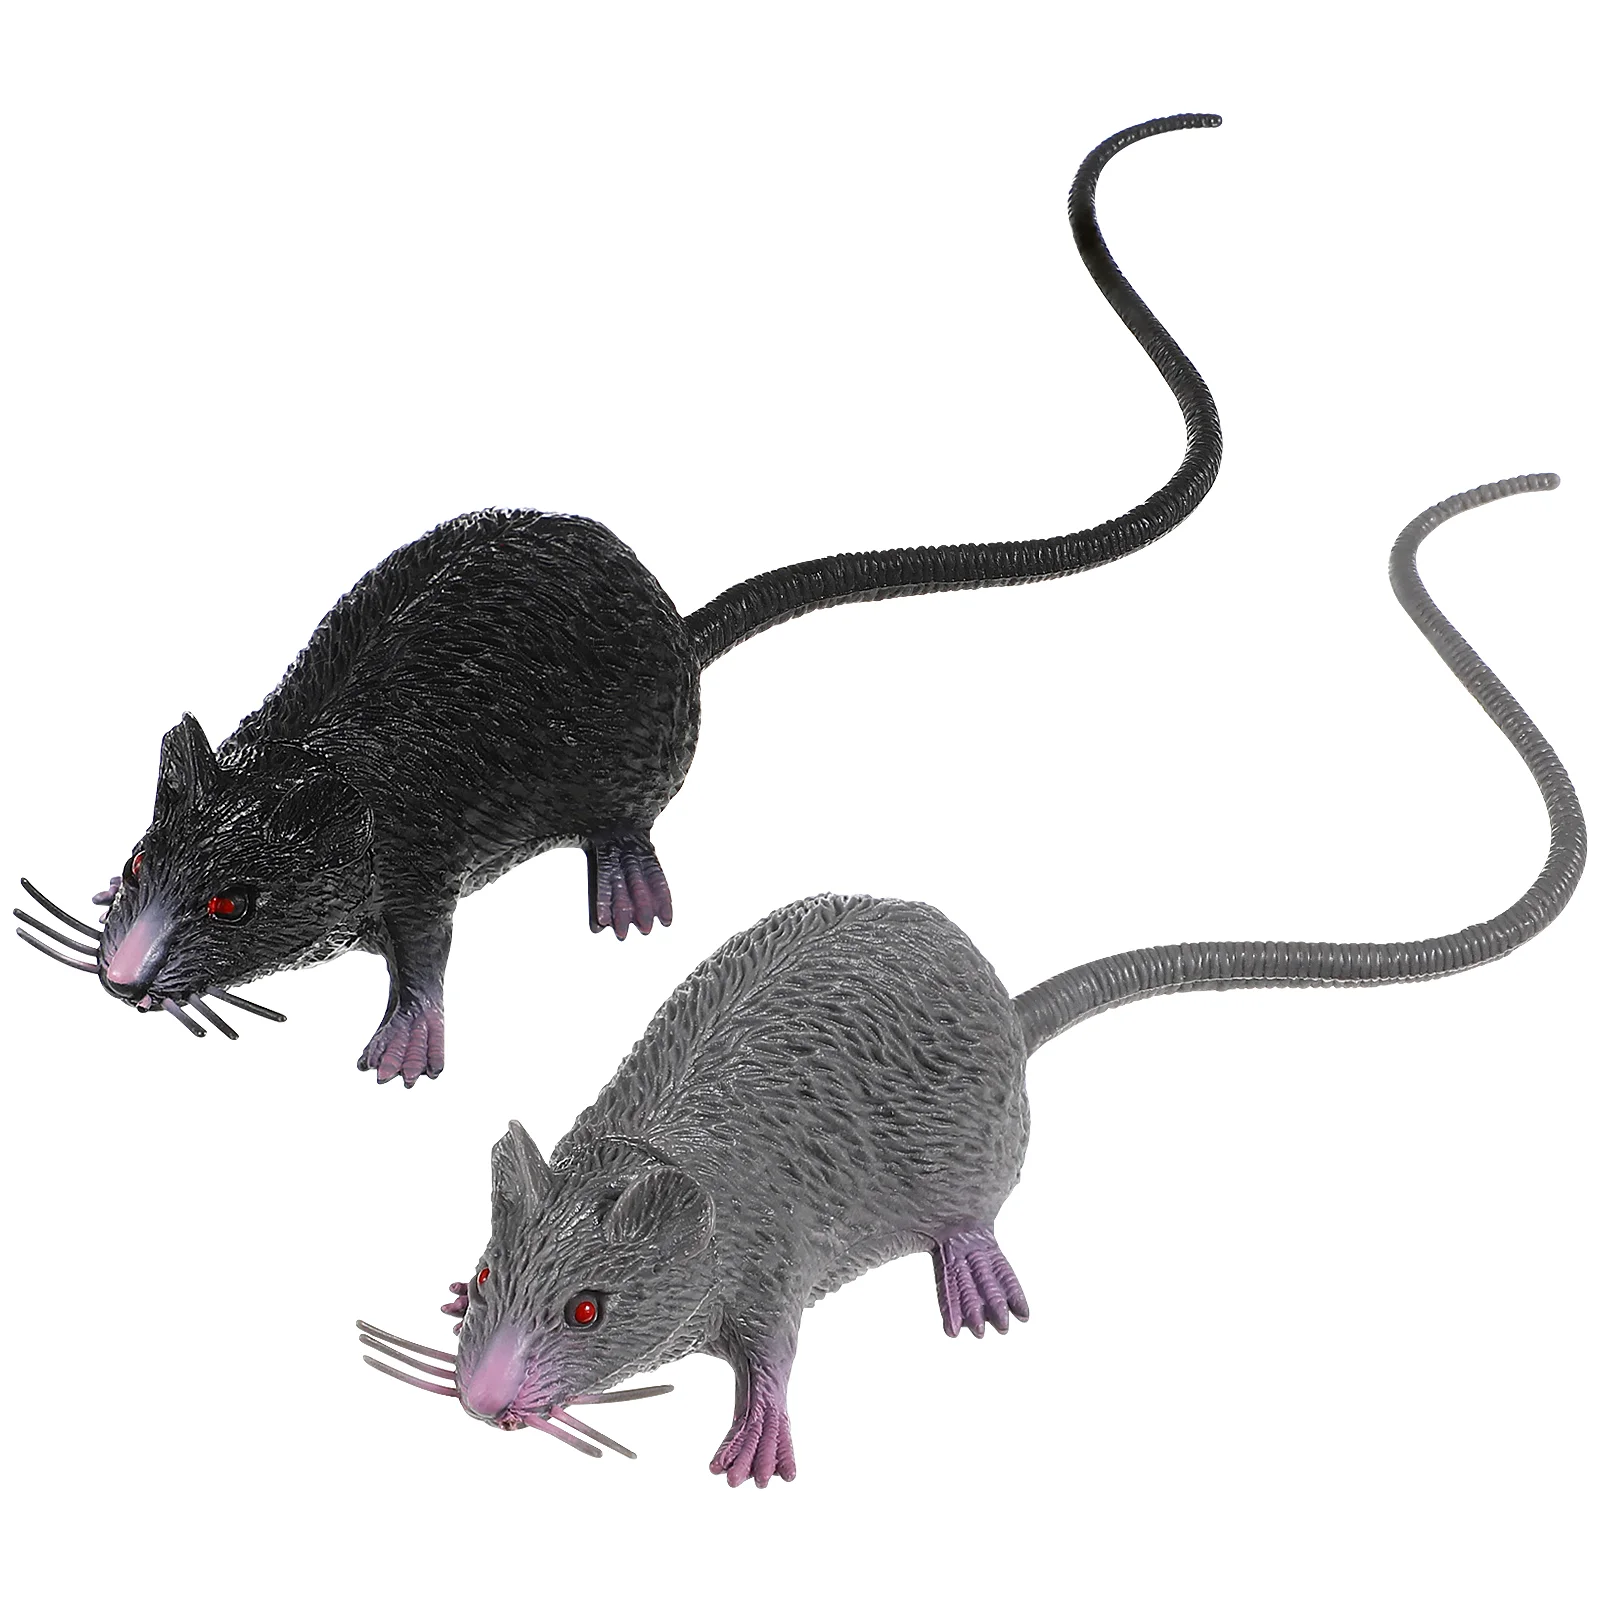 

2 Pack Mouse, Mouse Model, Stimulated Rat Tricks Pranks Props for Spooky Scary Creepy Decor ( Black, Gray )